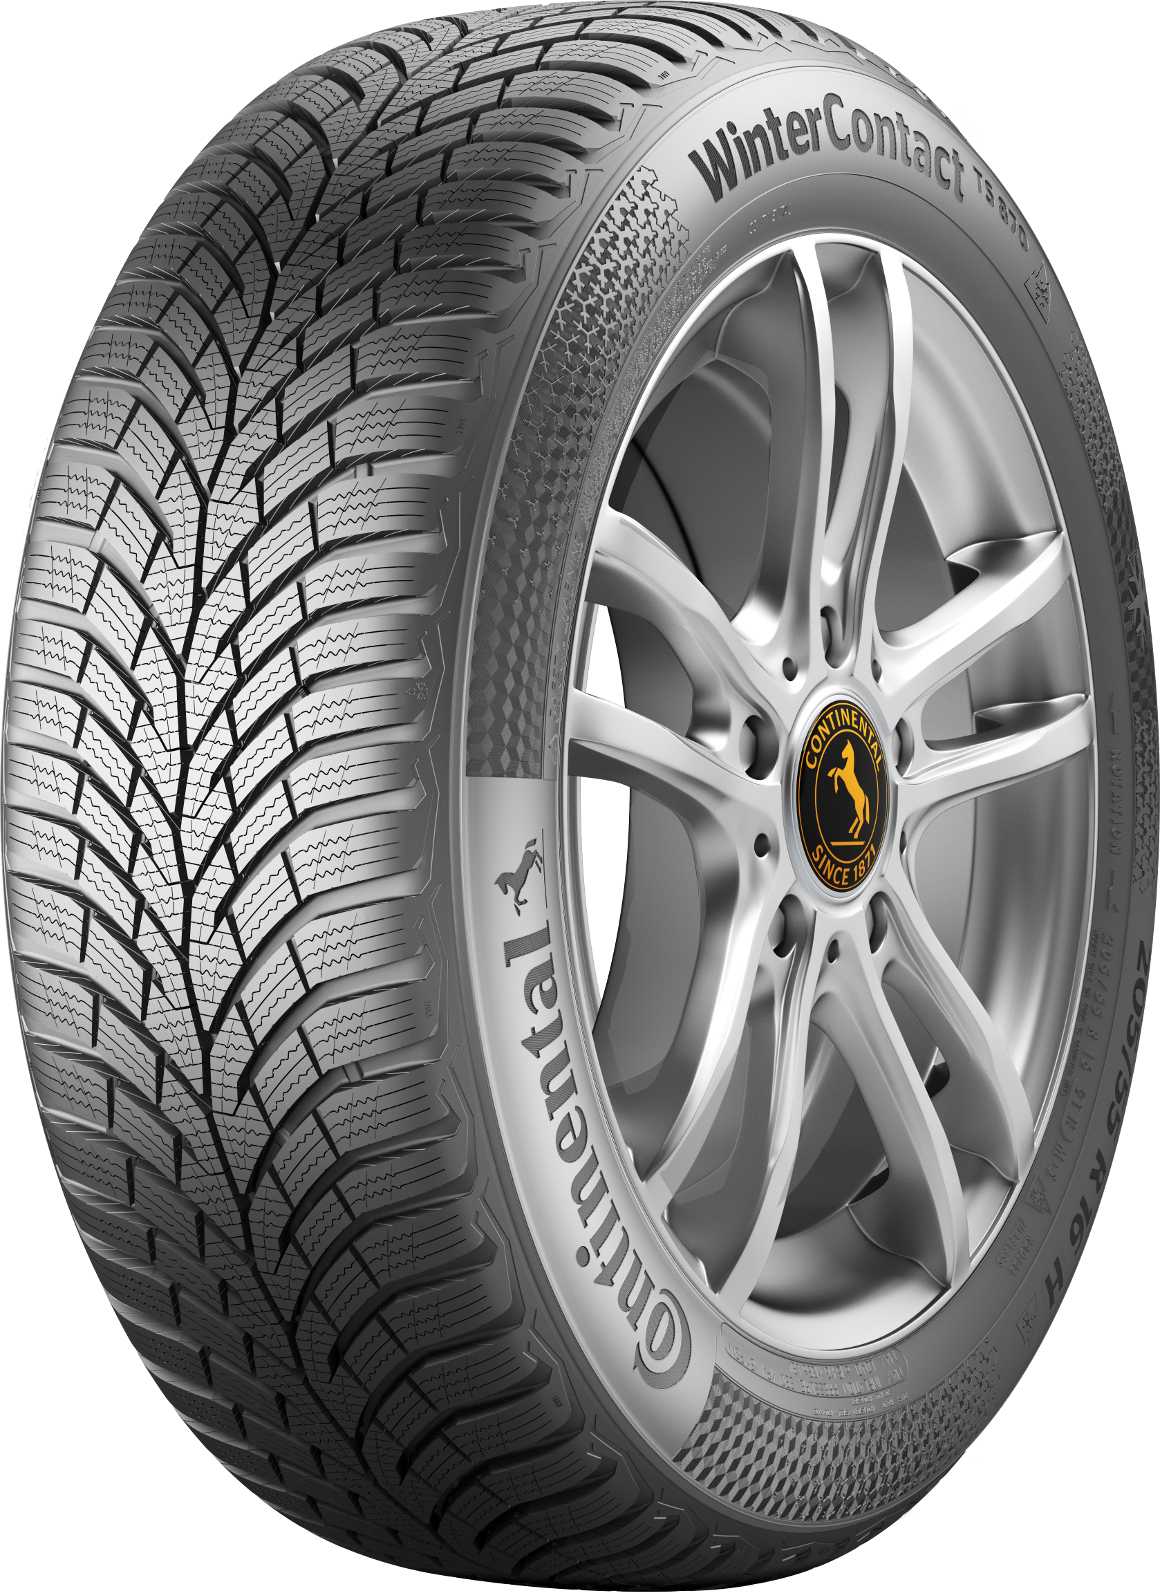    Continental Winter Contact TS870 195/55 R15 